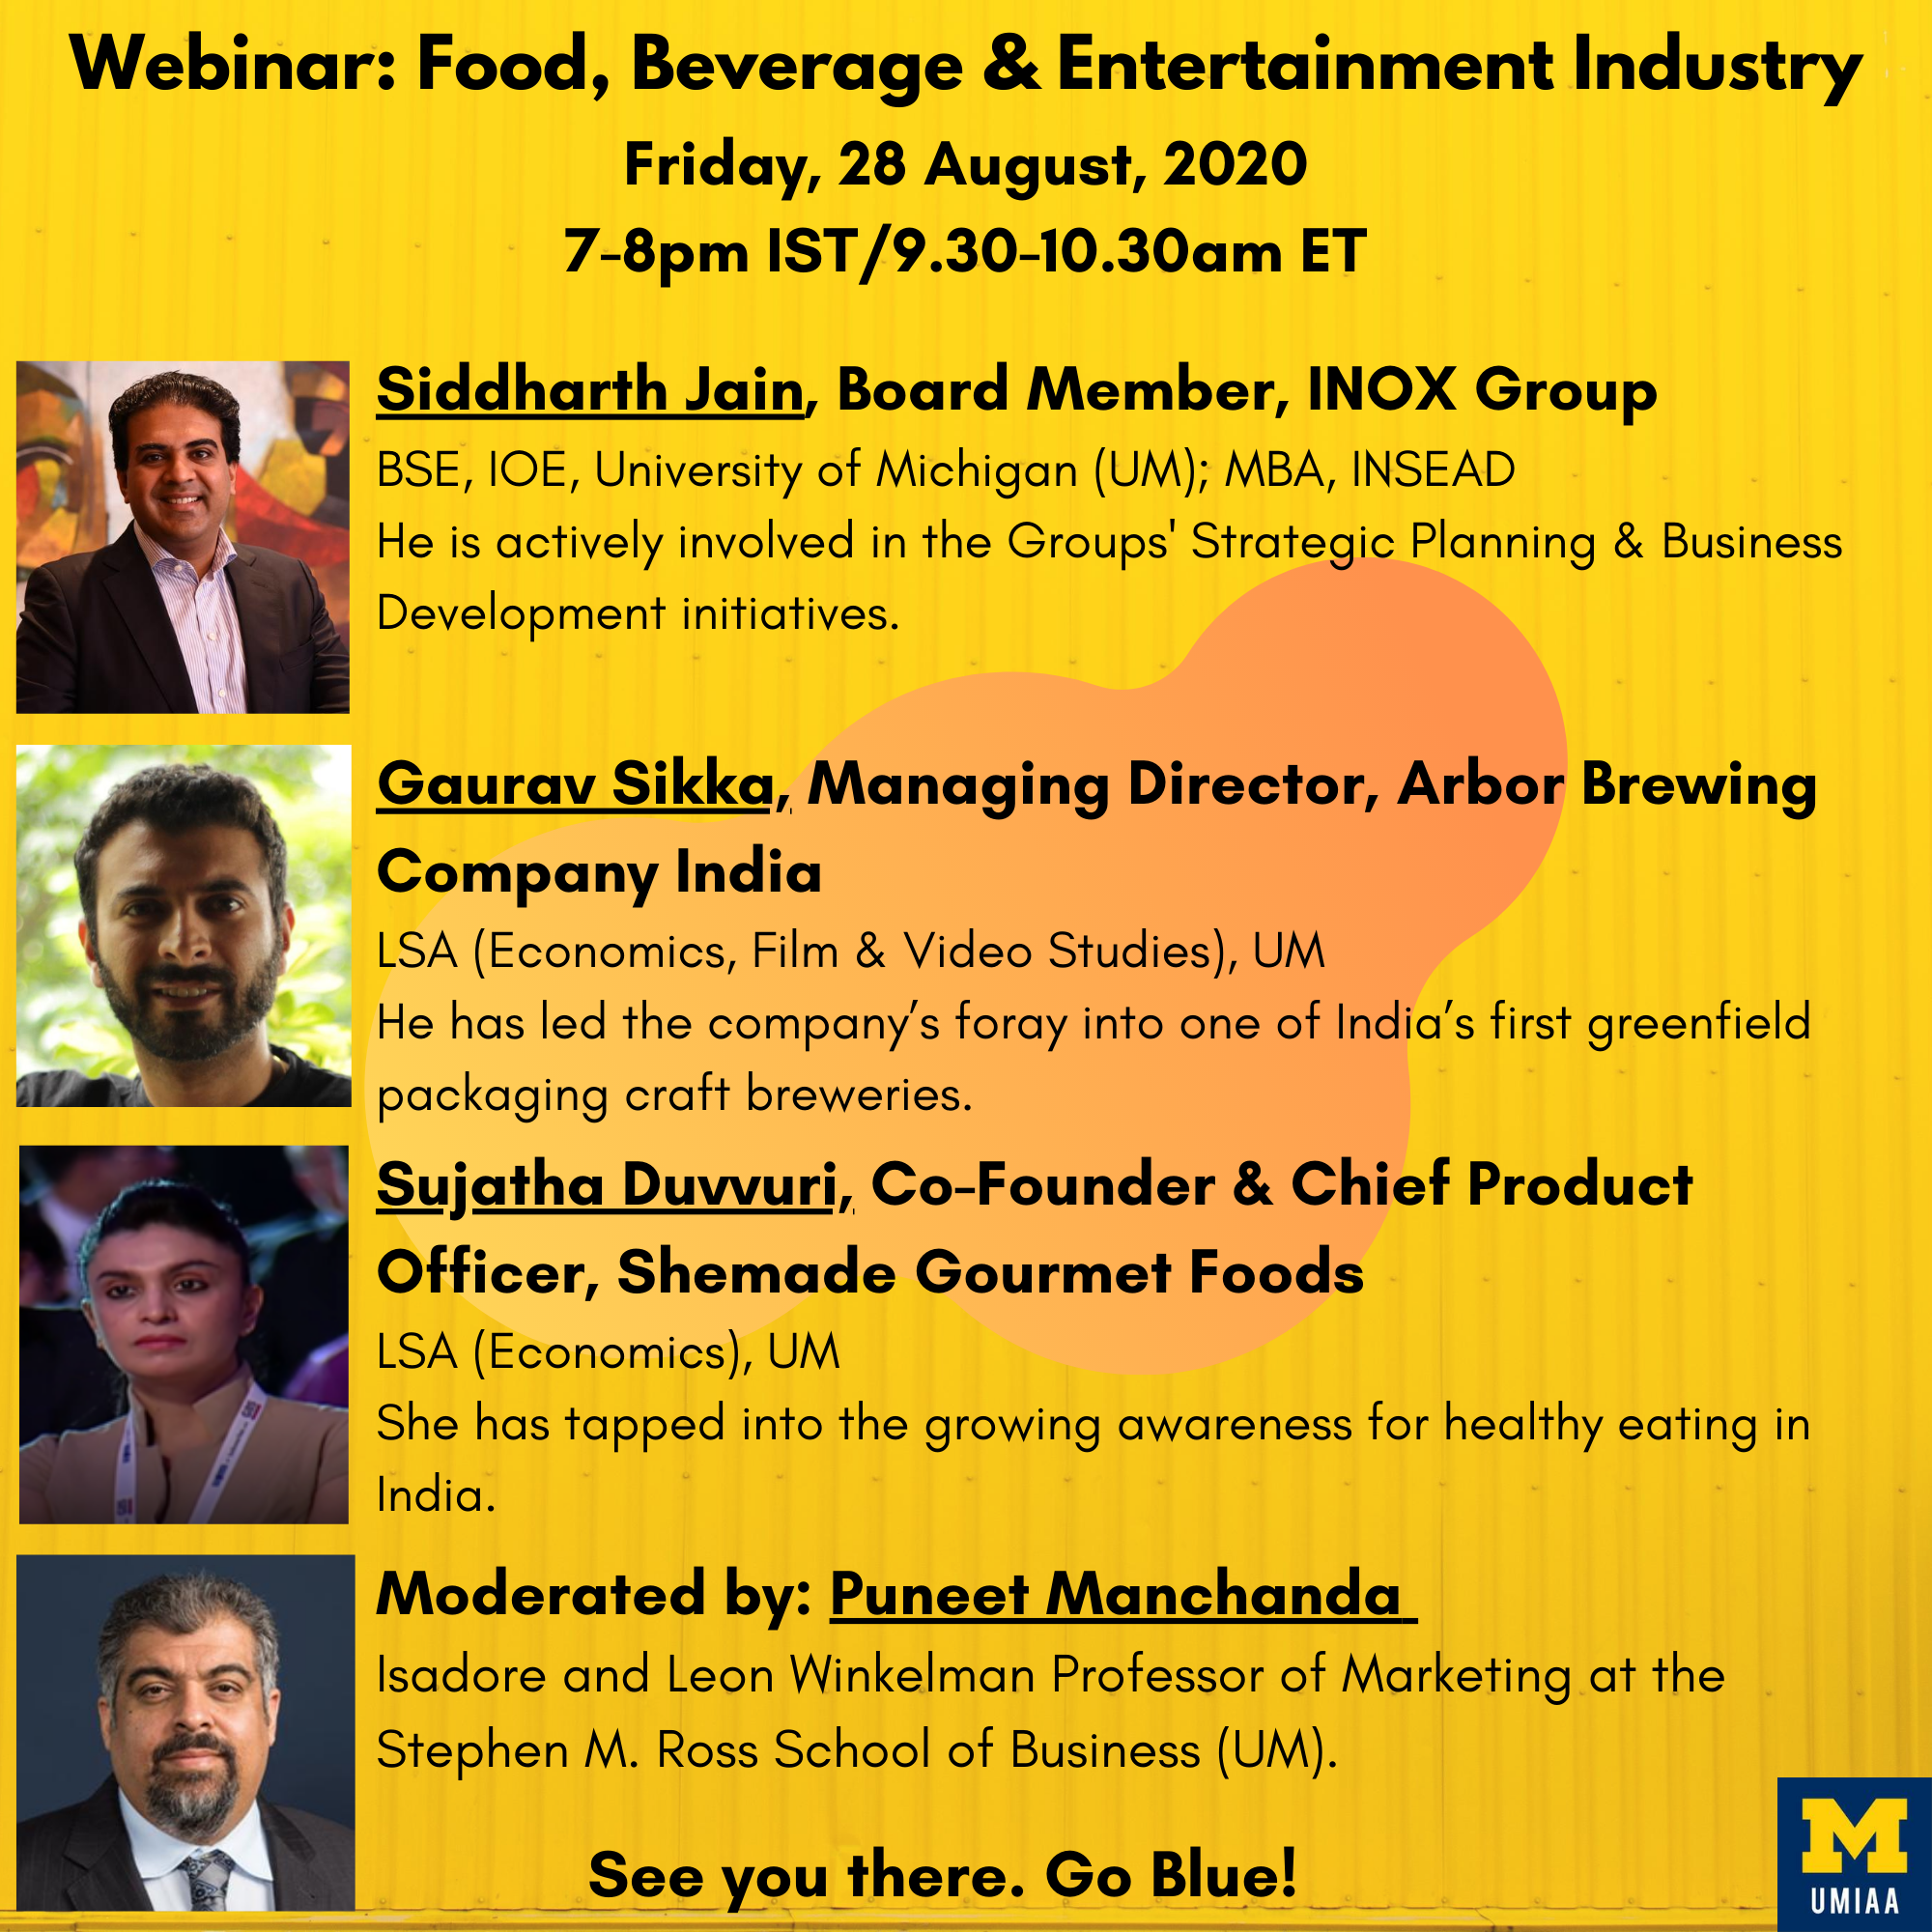 Food, Beverages, and Entertainment Industry Webinar